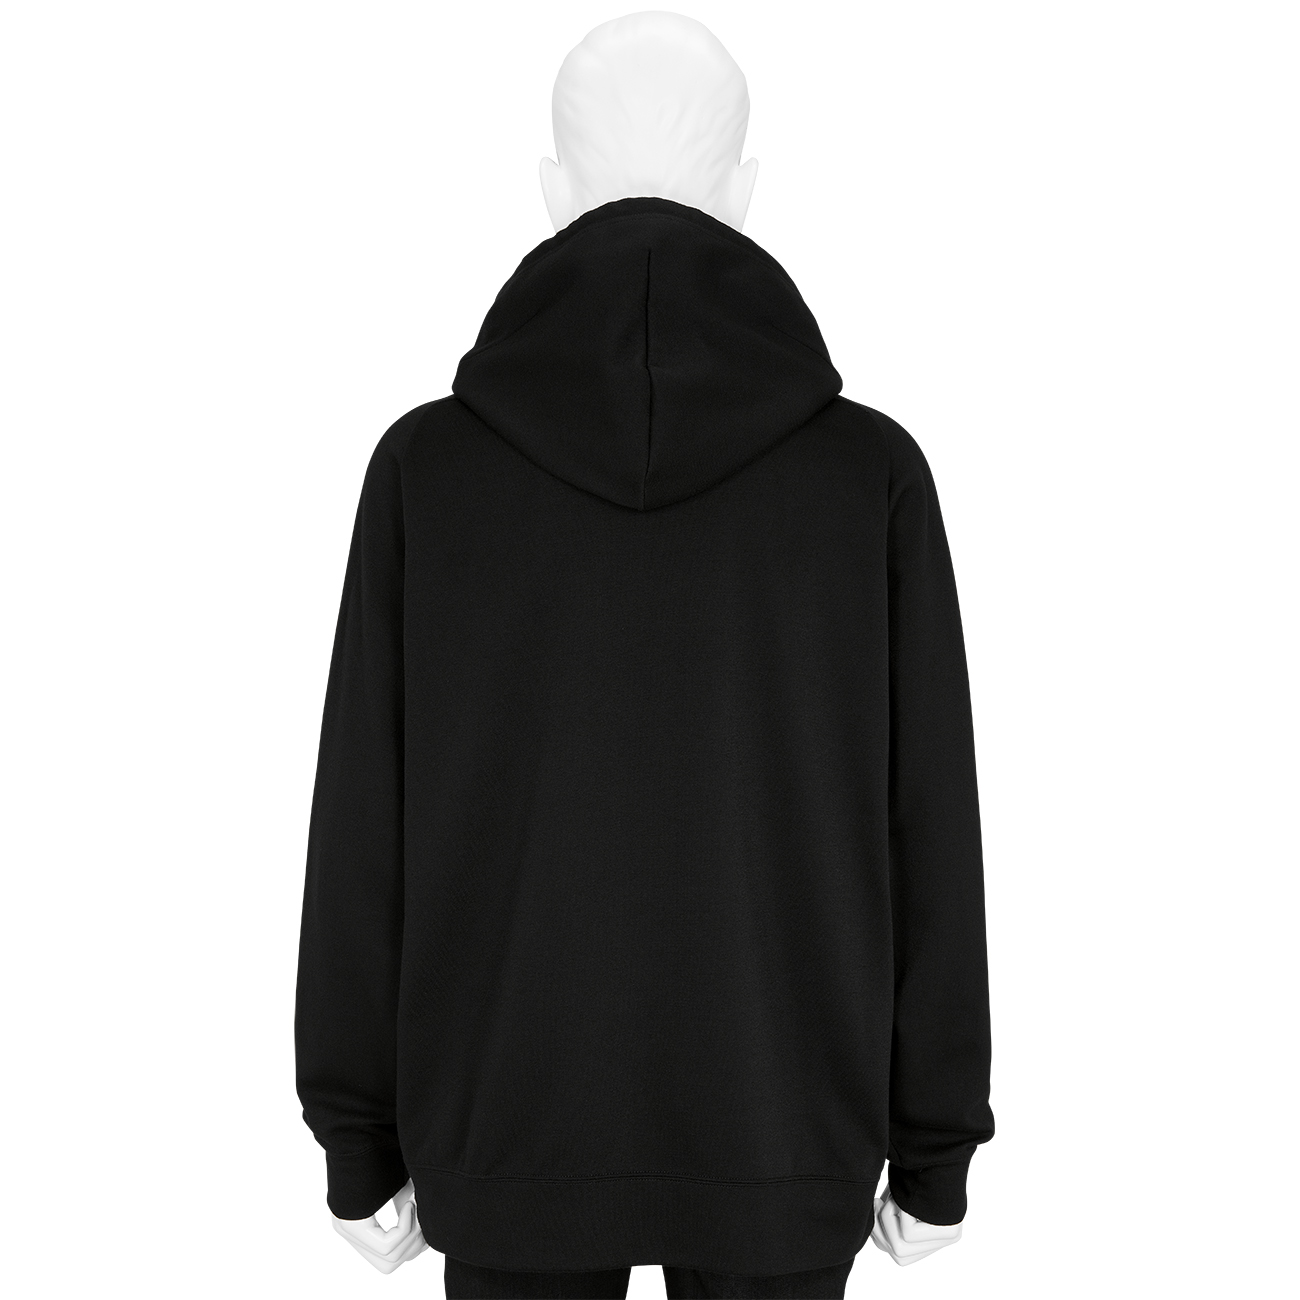 WHITE MOUNTAINEERING BLK (ホワイトマウンテニアリング ビーエルケー) - CONTRASTED HOODIE BLACKの詳細画像3